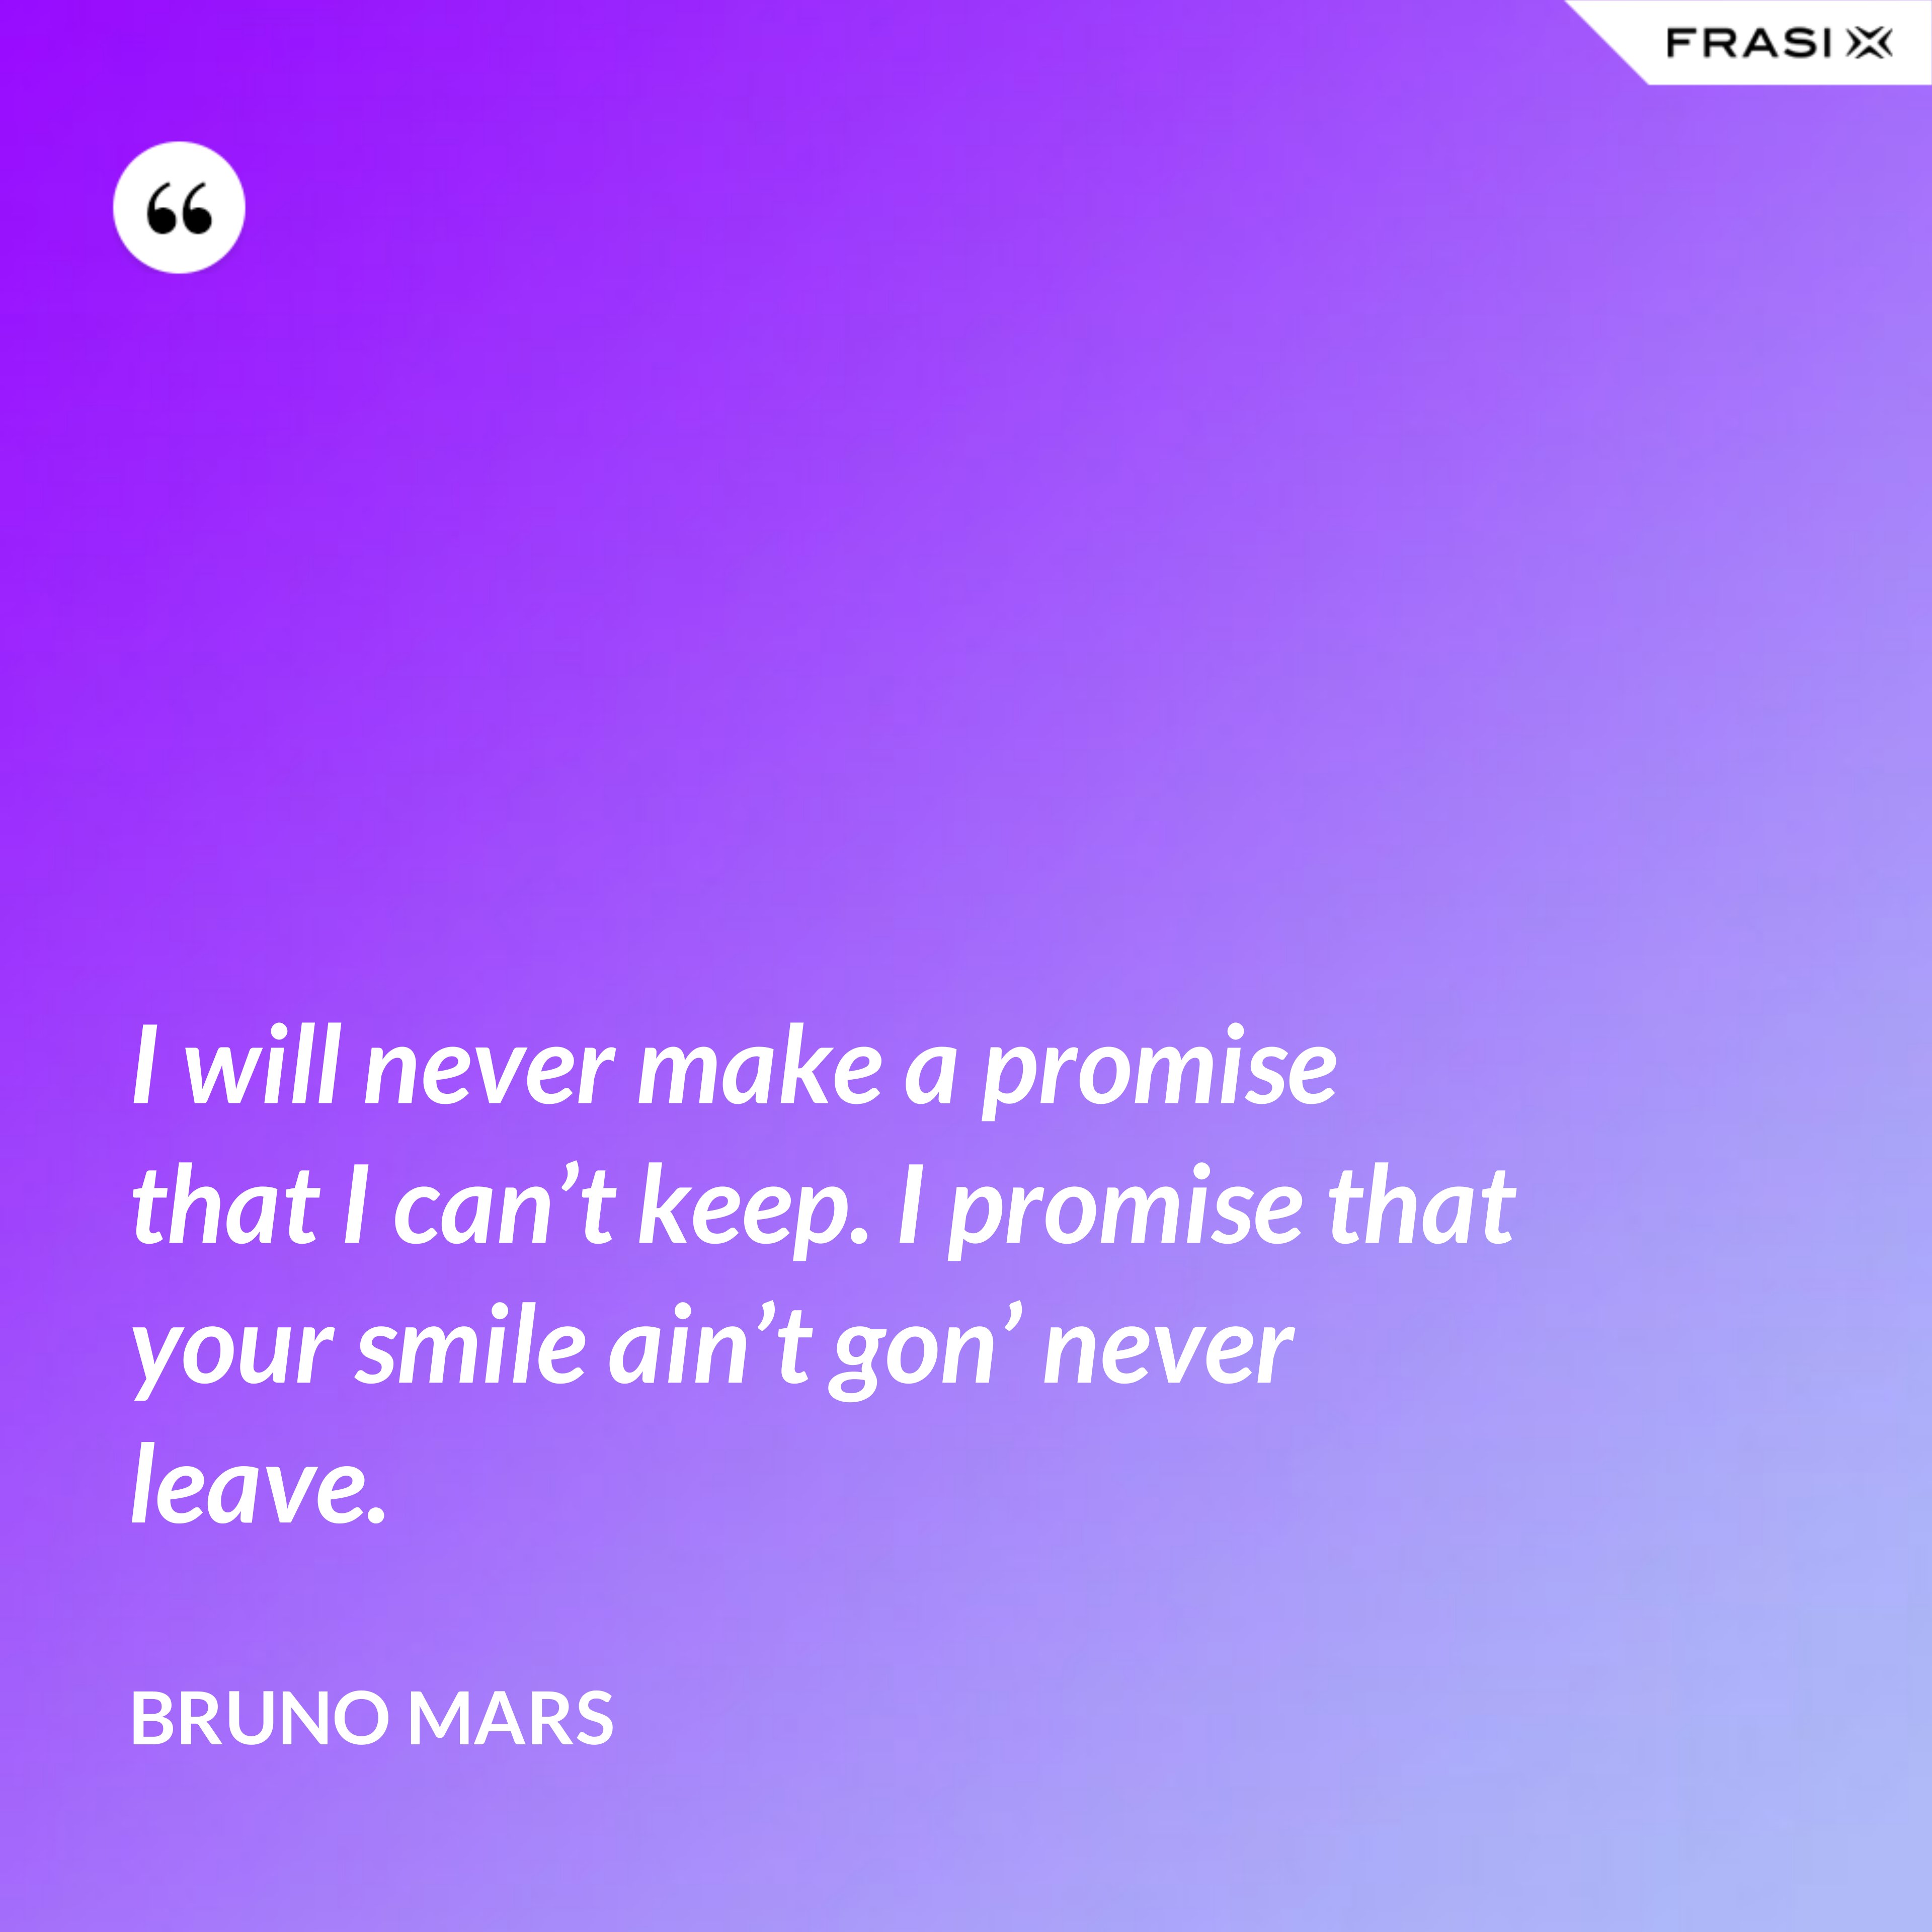 I will never make a promise that I can’t keep. I promise that your smile ain’t gon’ never leave. - Bruno Mars